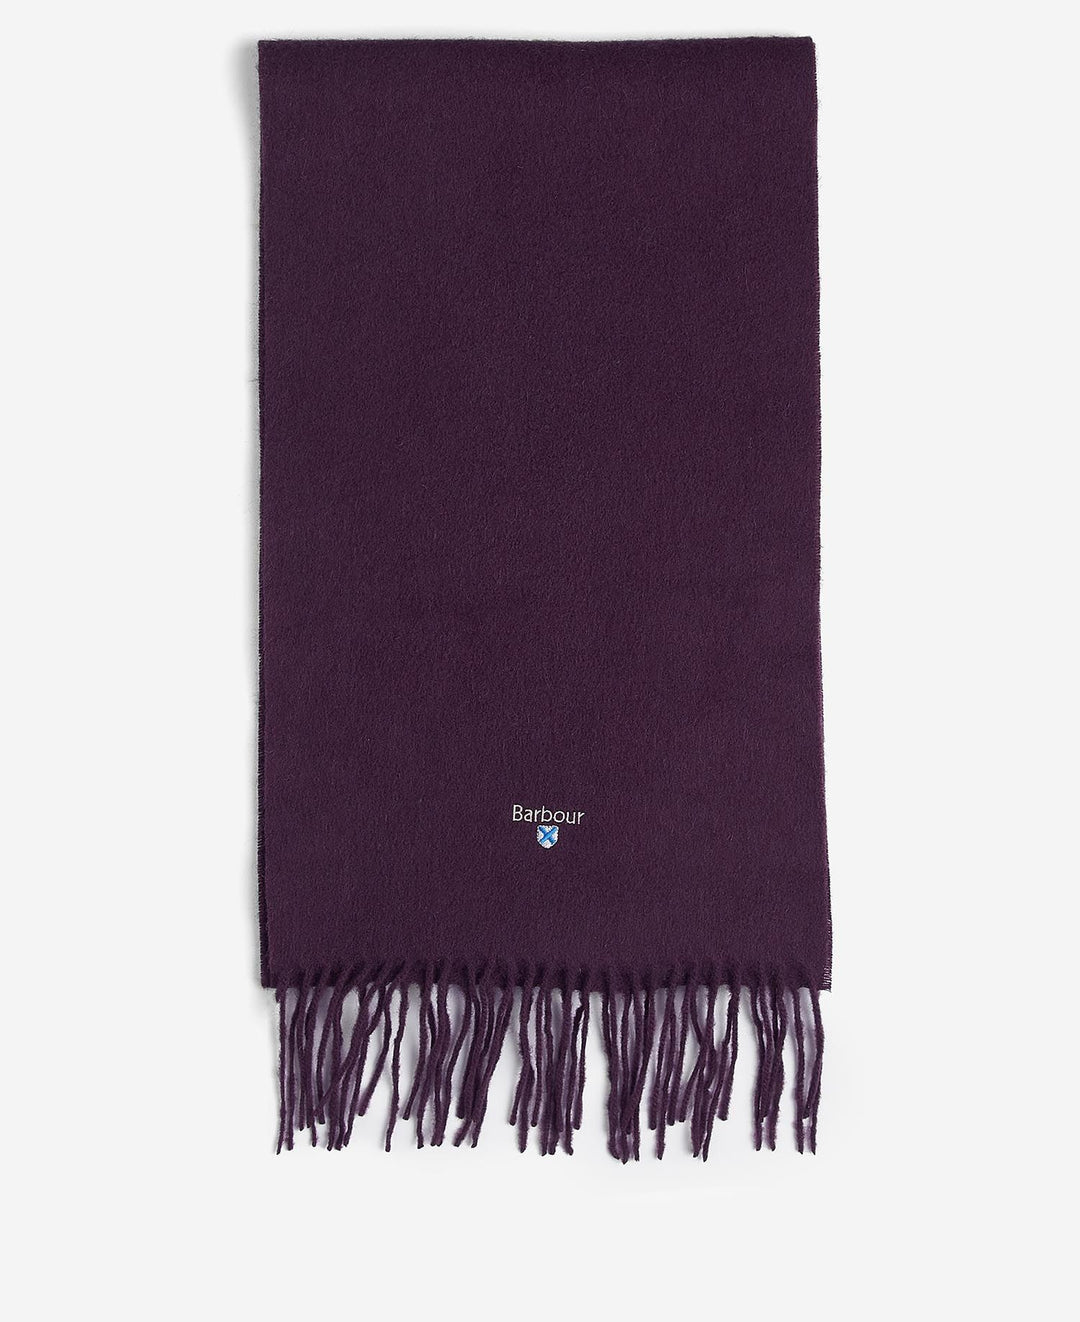 BARBOUR PLAIN LAMBSWOOL SCARF - PU35